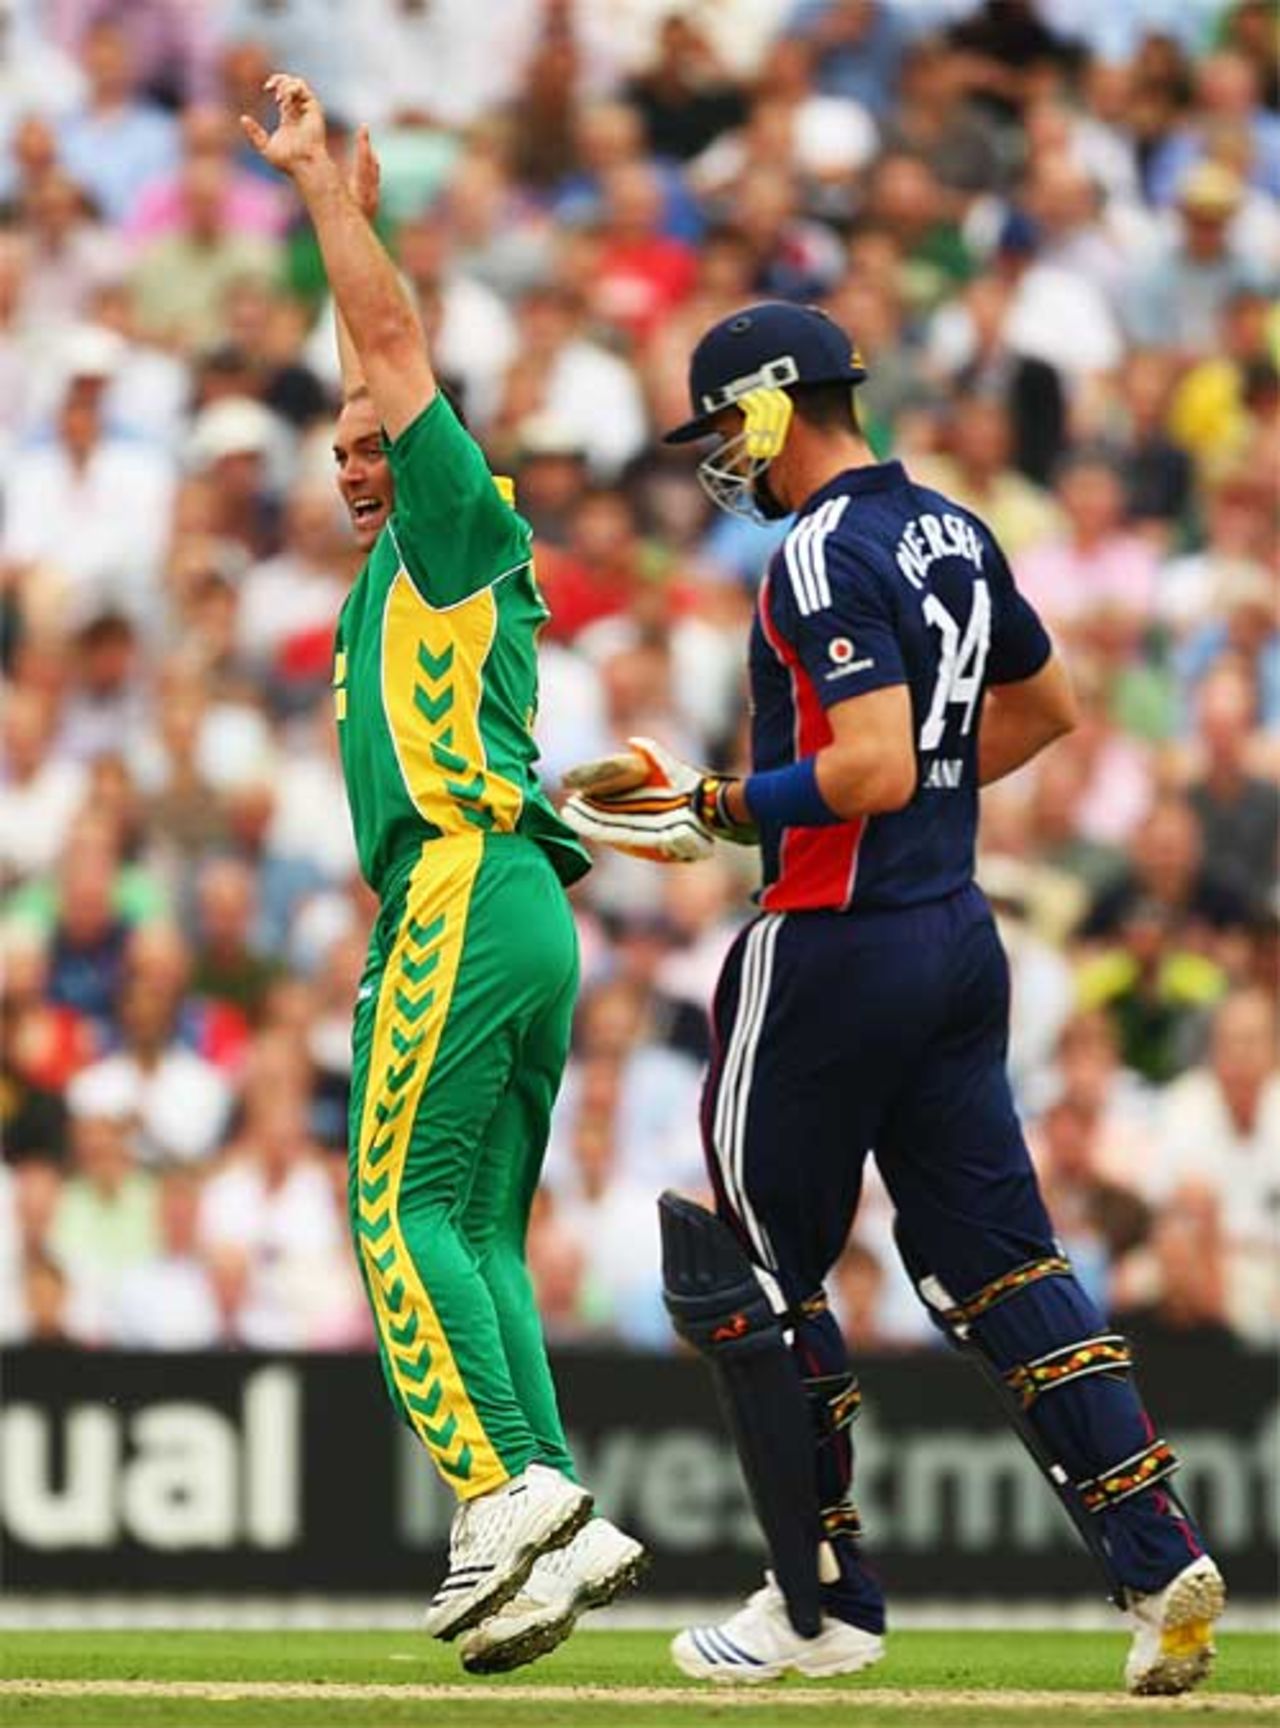 Jacques Kallis removes Kevin Pietersen as England totter, England v South Africa, 3rd ODI, The Oval, August 29, 2008